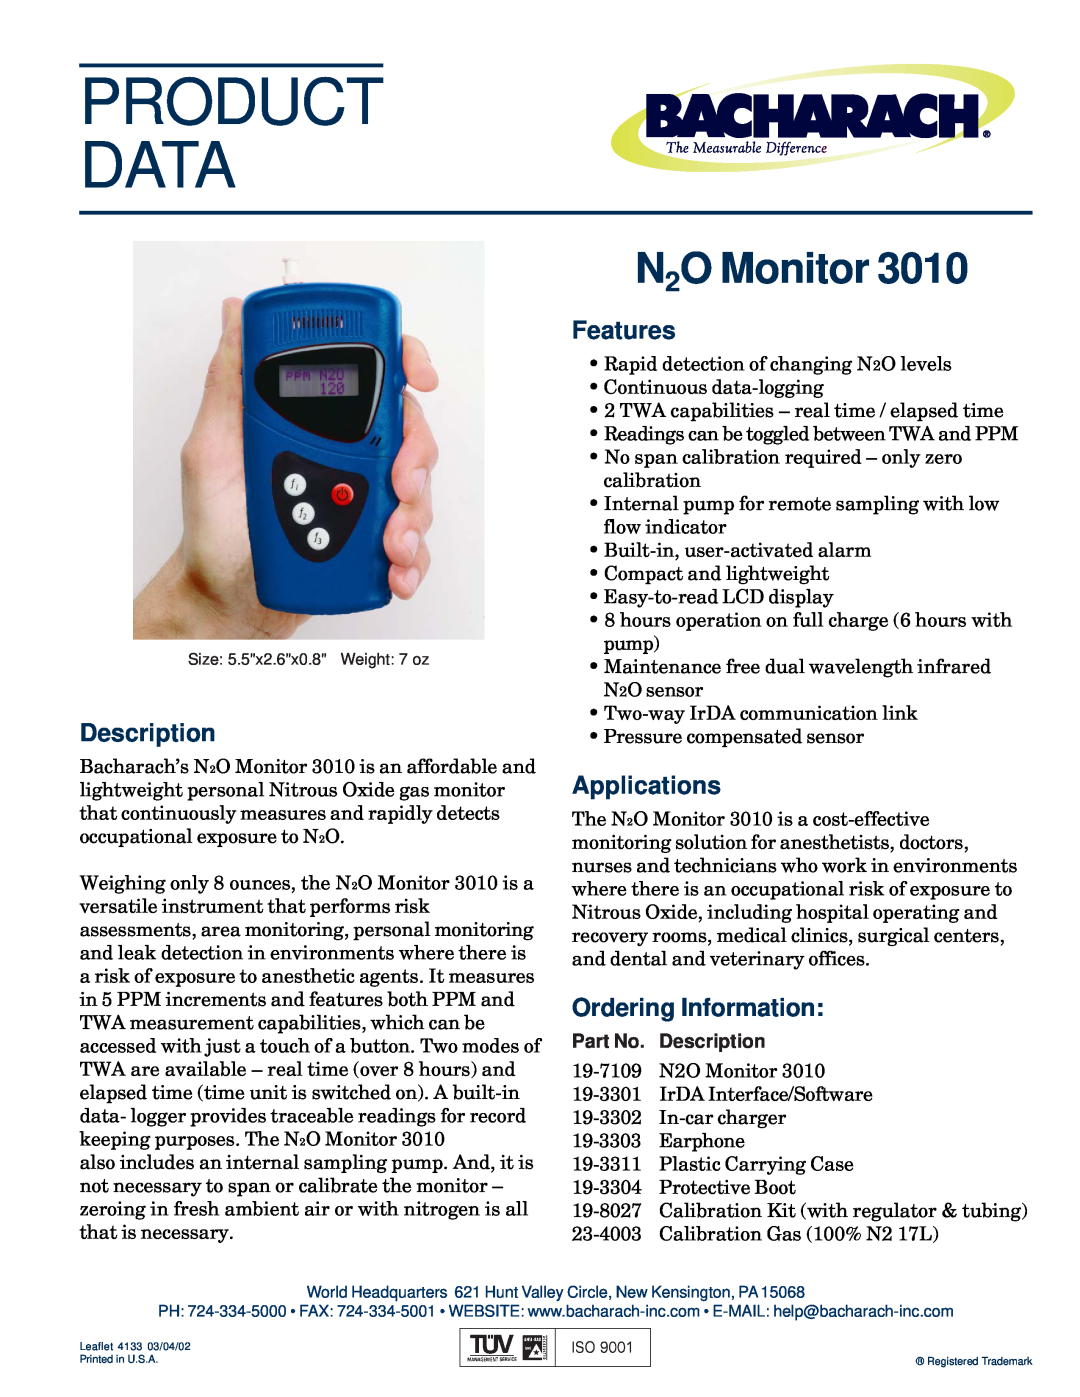 Bacharach 3010 manual Product Data, N2O Monitor, Description, Features, Applications, Ordering Information 